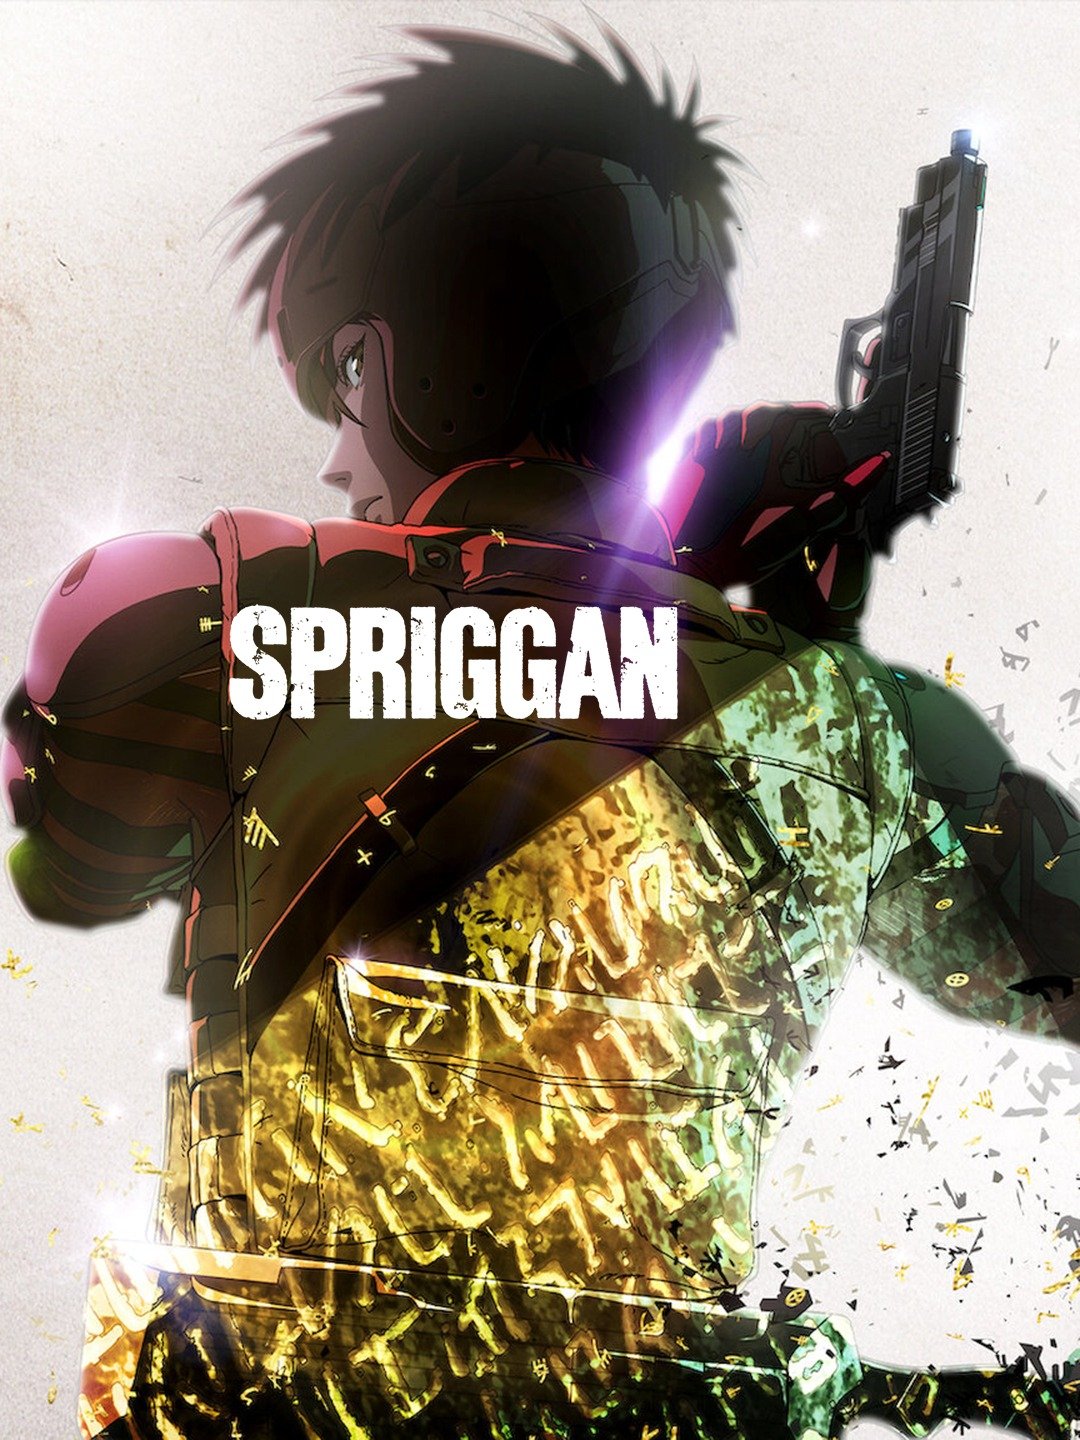 Spriggan - The Summer 2022 Preview Guide - Anime News Network